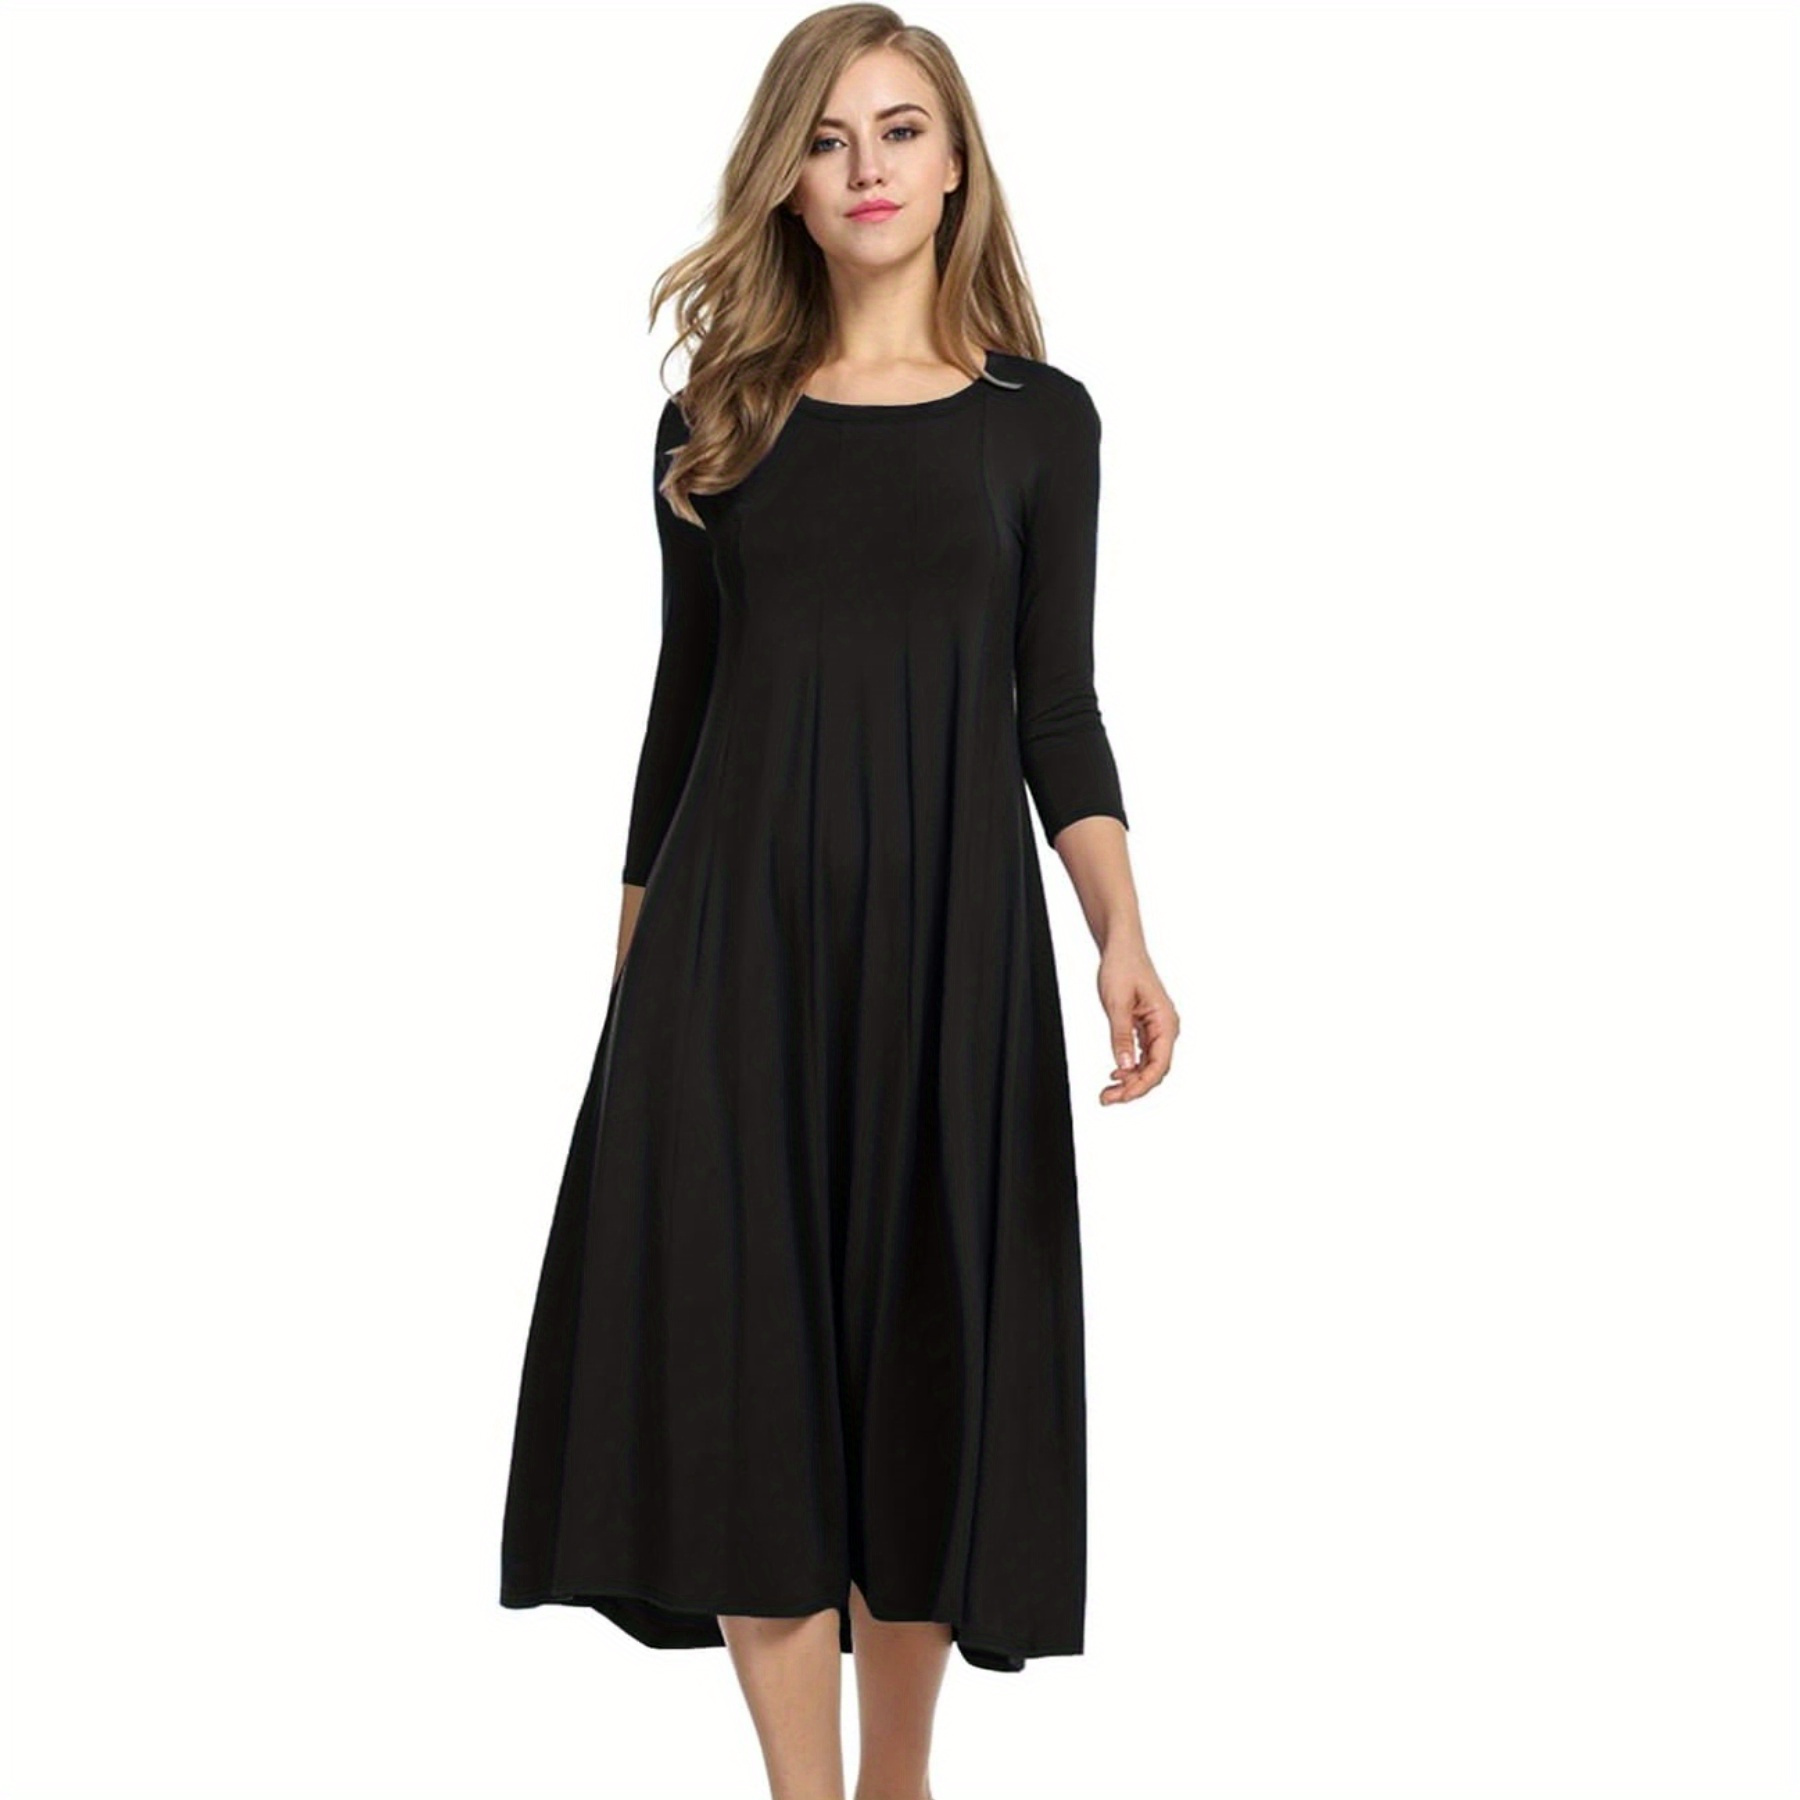 

Solid Color Crew Neck Midi Dress, Casual 3/4 Sleeve Loose Dress For Spring & Summer, Women's Clothing